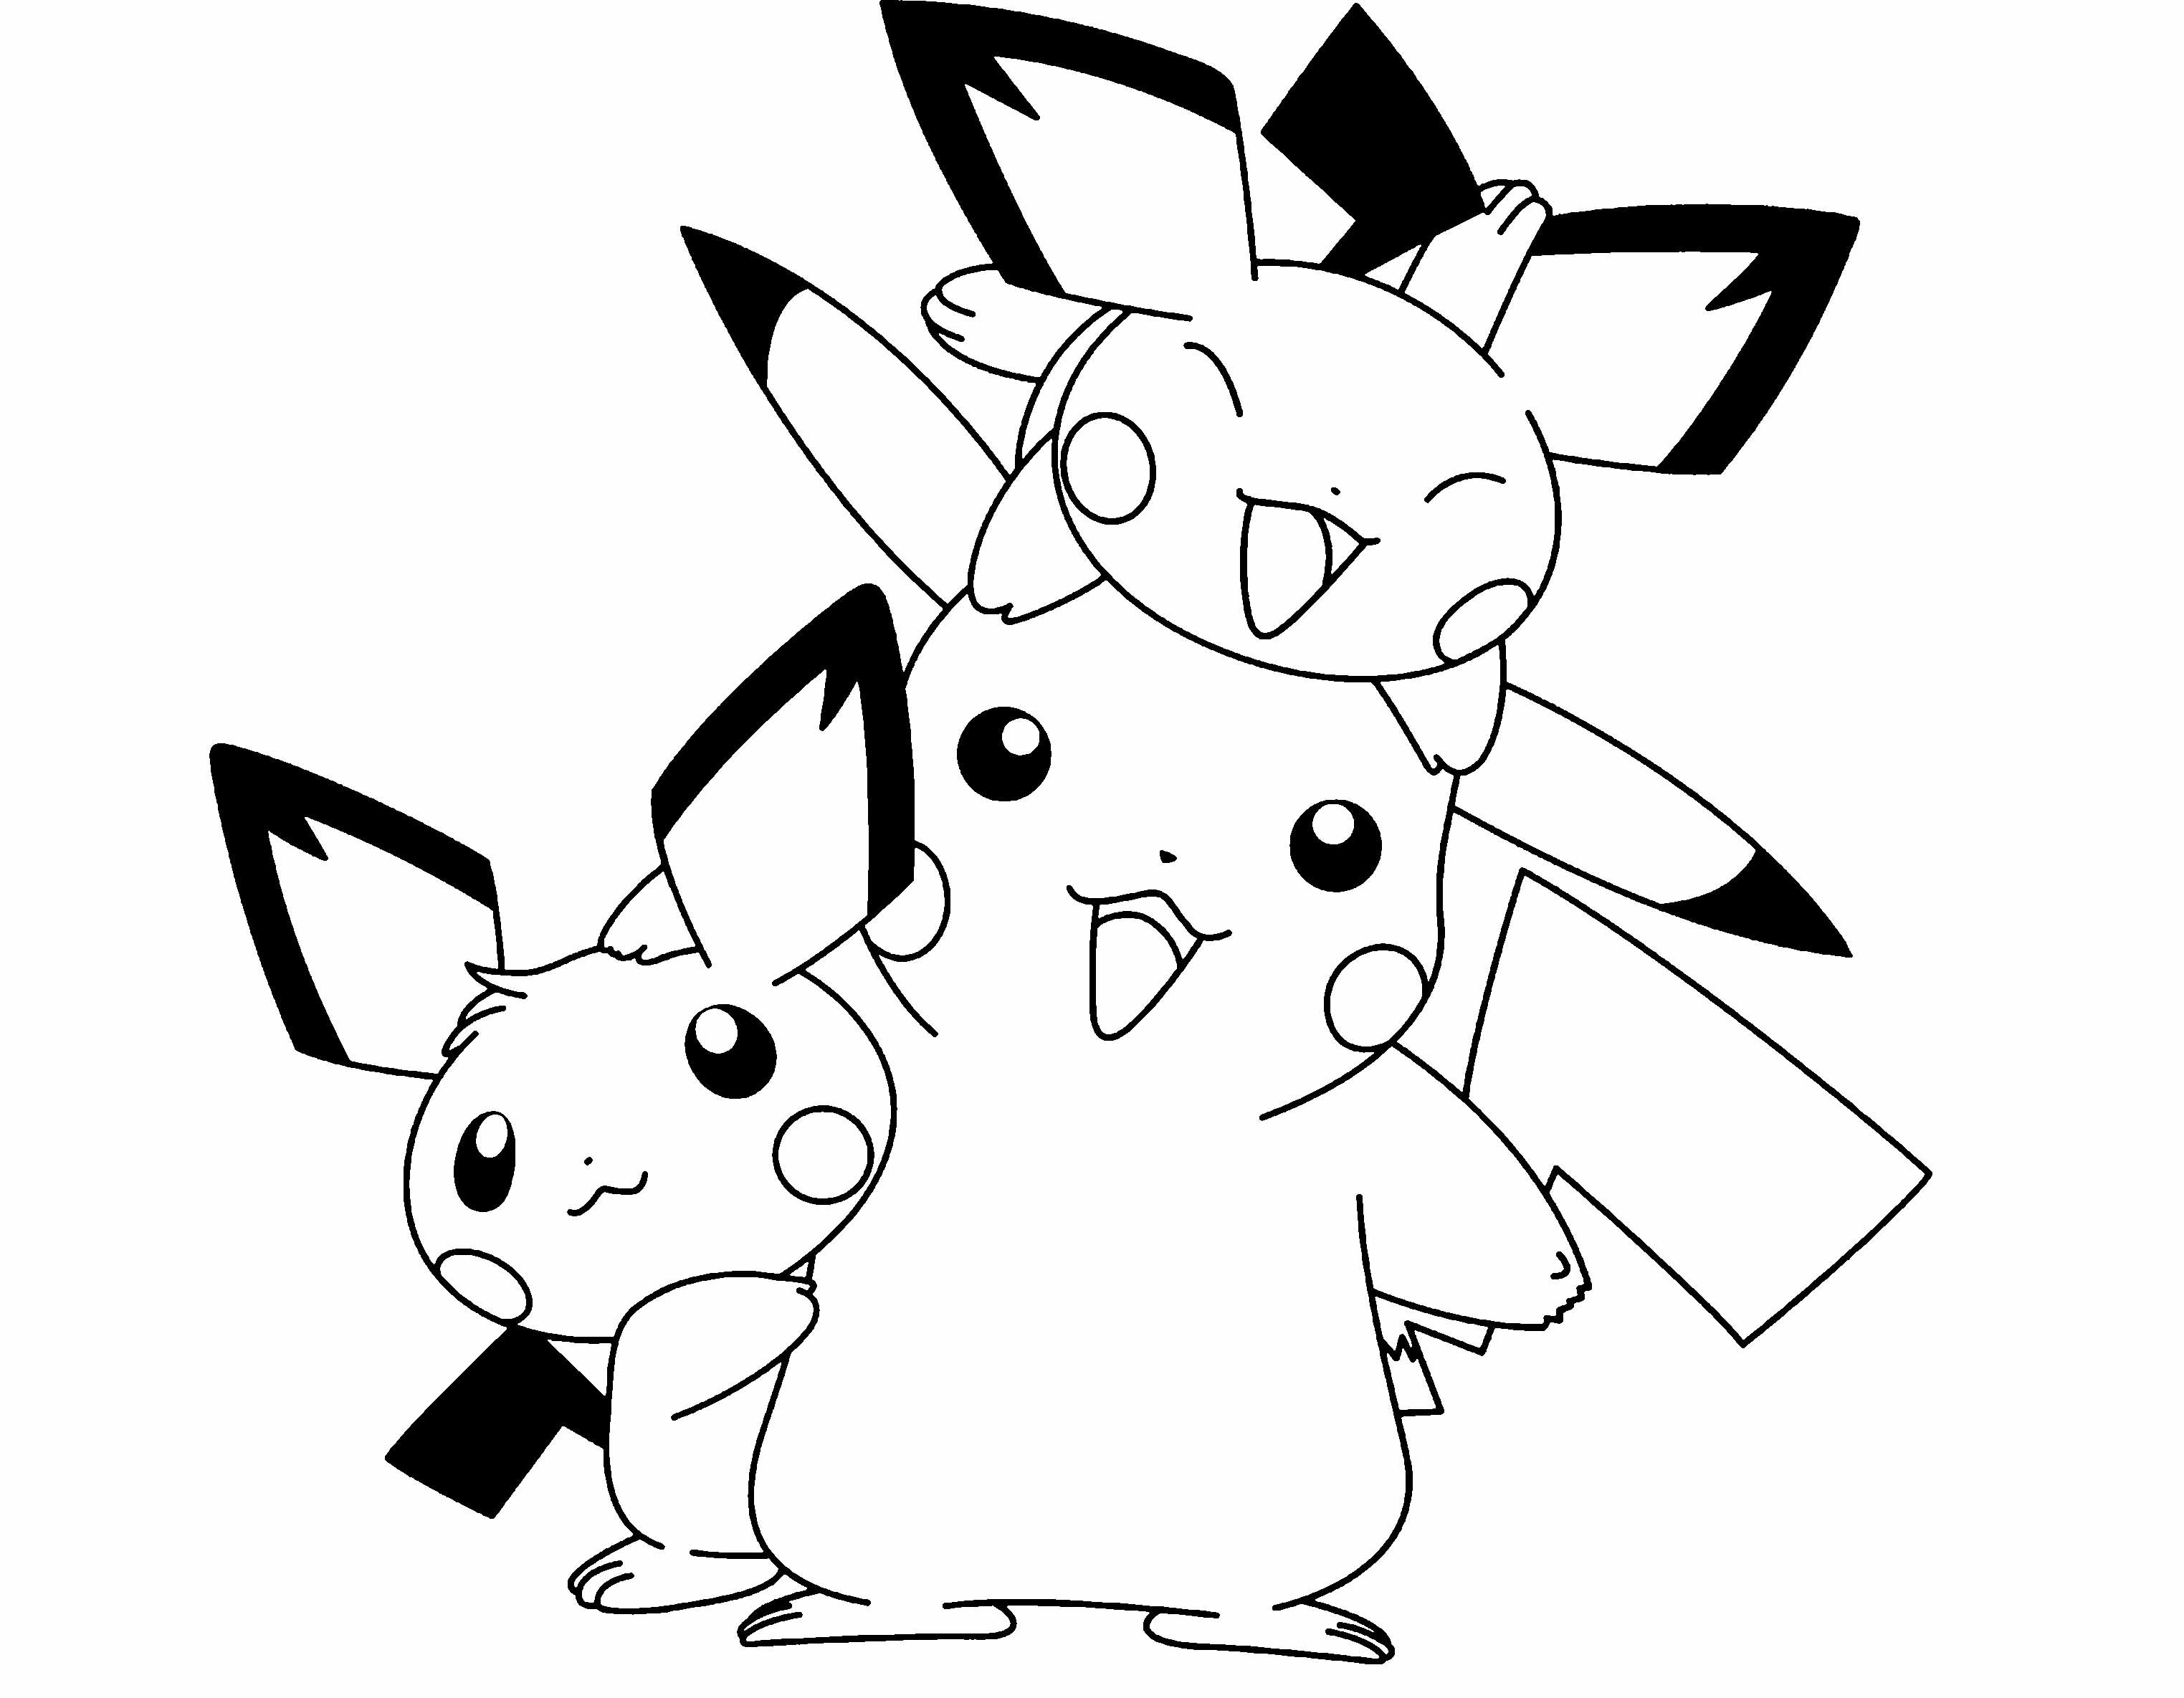 Coloring Sheets For Girls Picachoo
 Cute Baby Pokemon Coloring Pages To Print The Color Panda